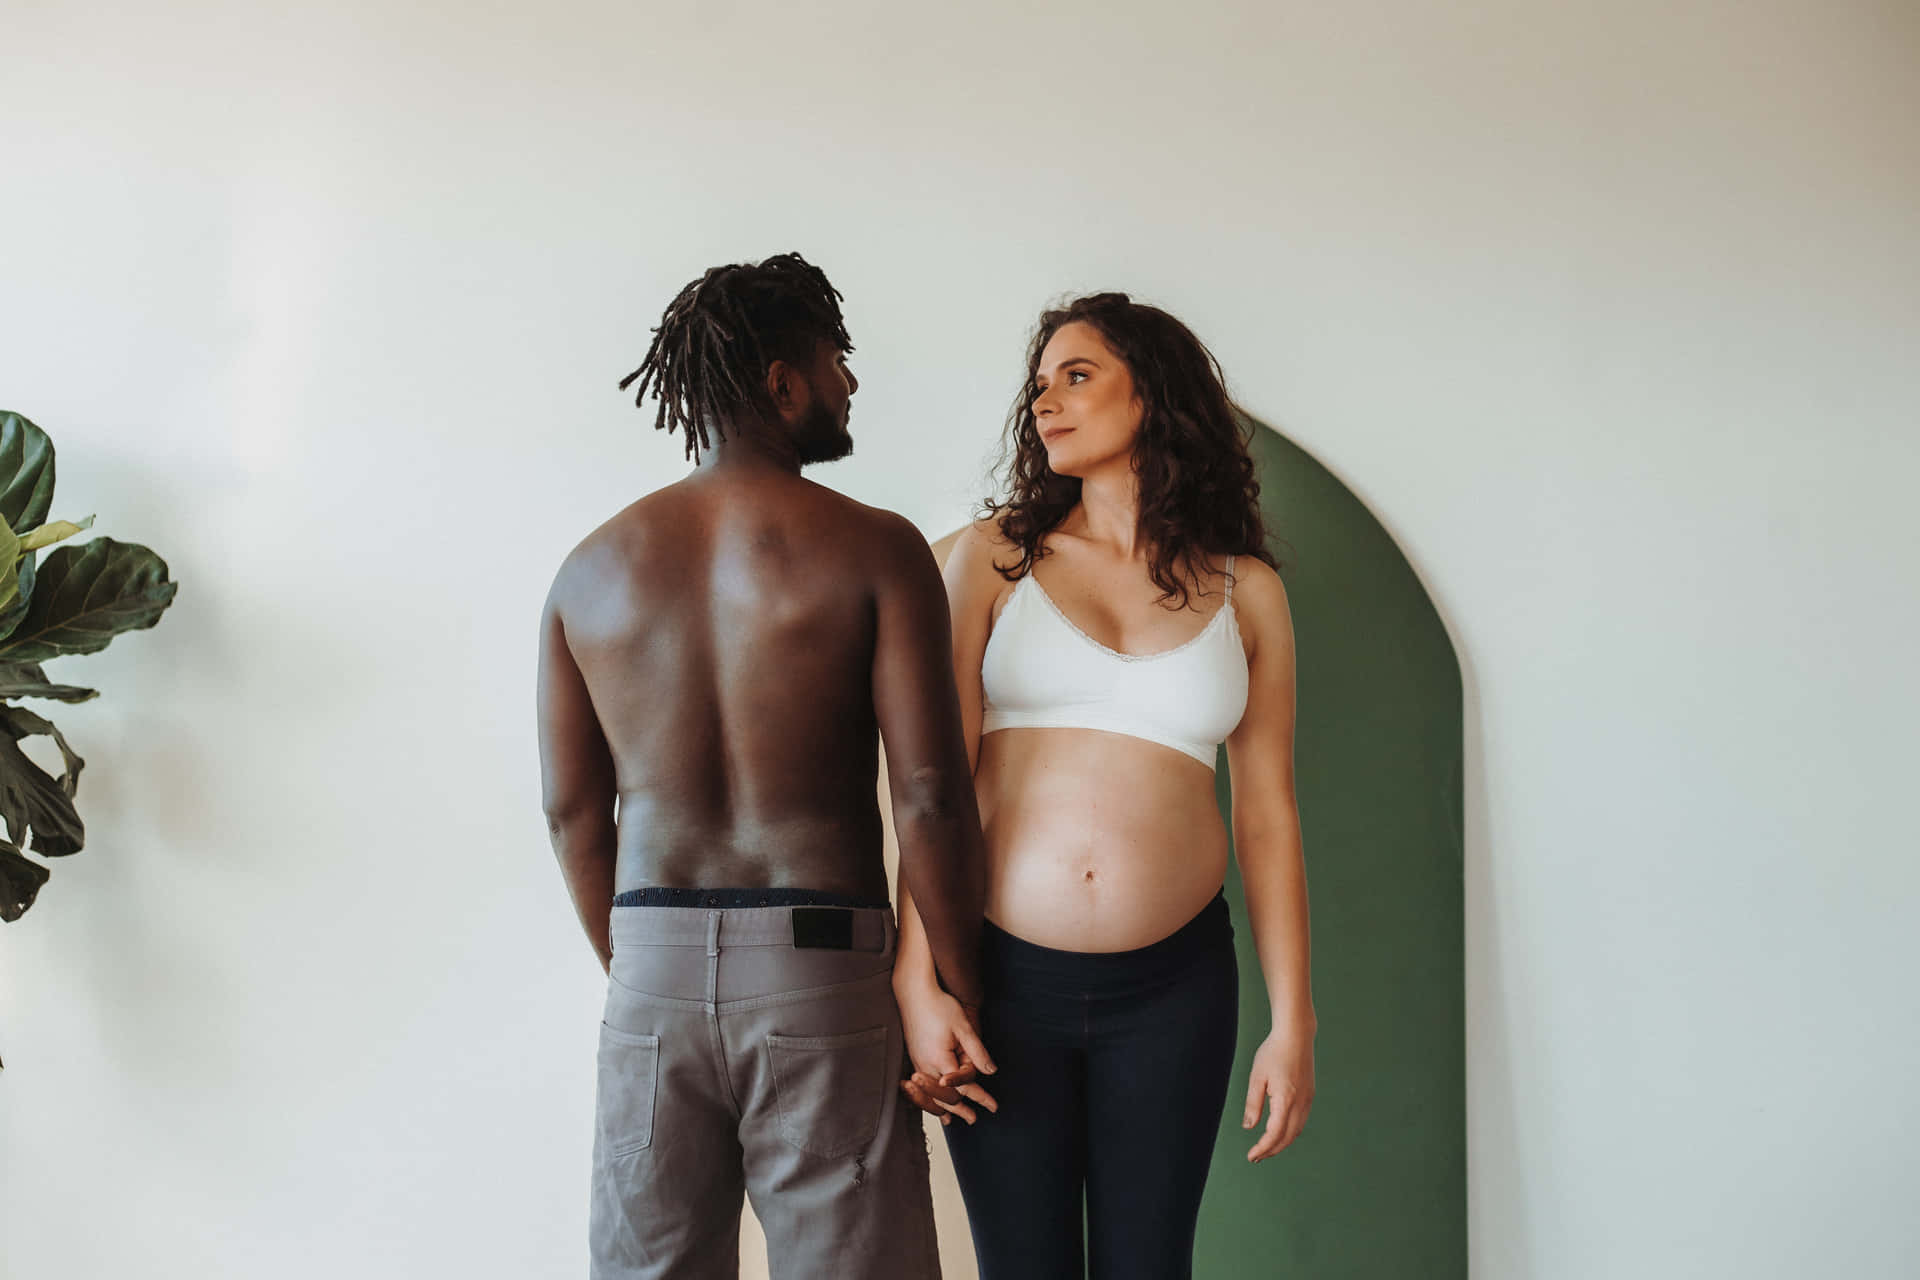 Maternity Pictures